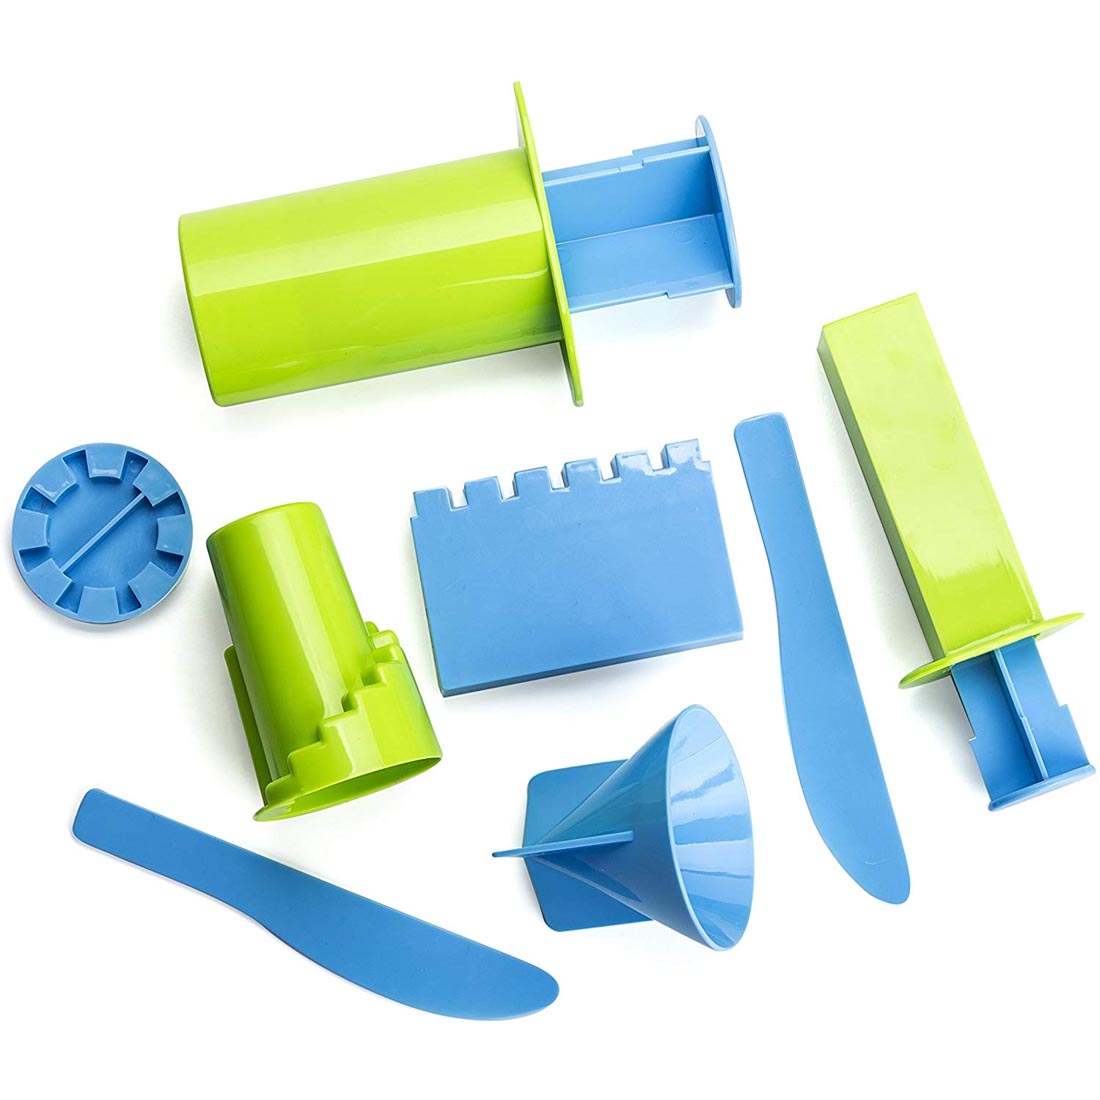 Set of molds and tools to build castles with sand or kinetic sand